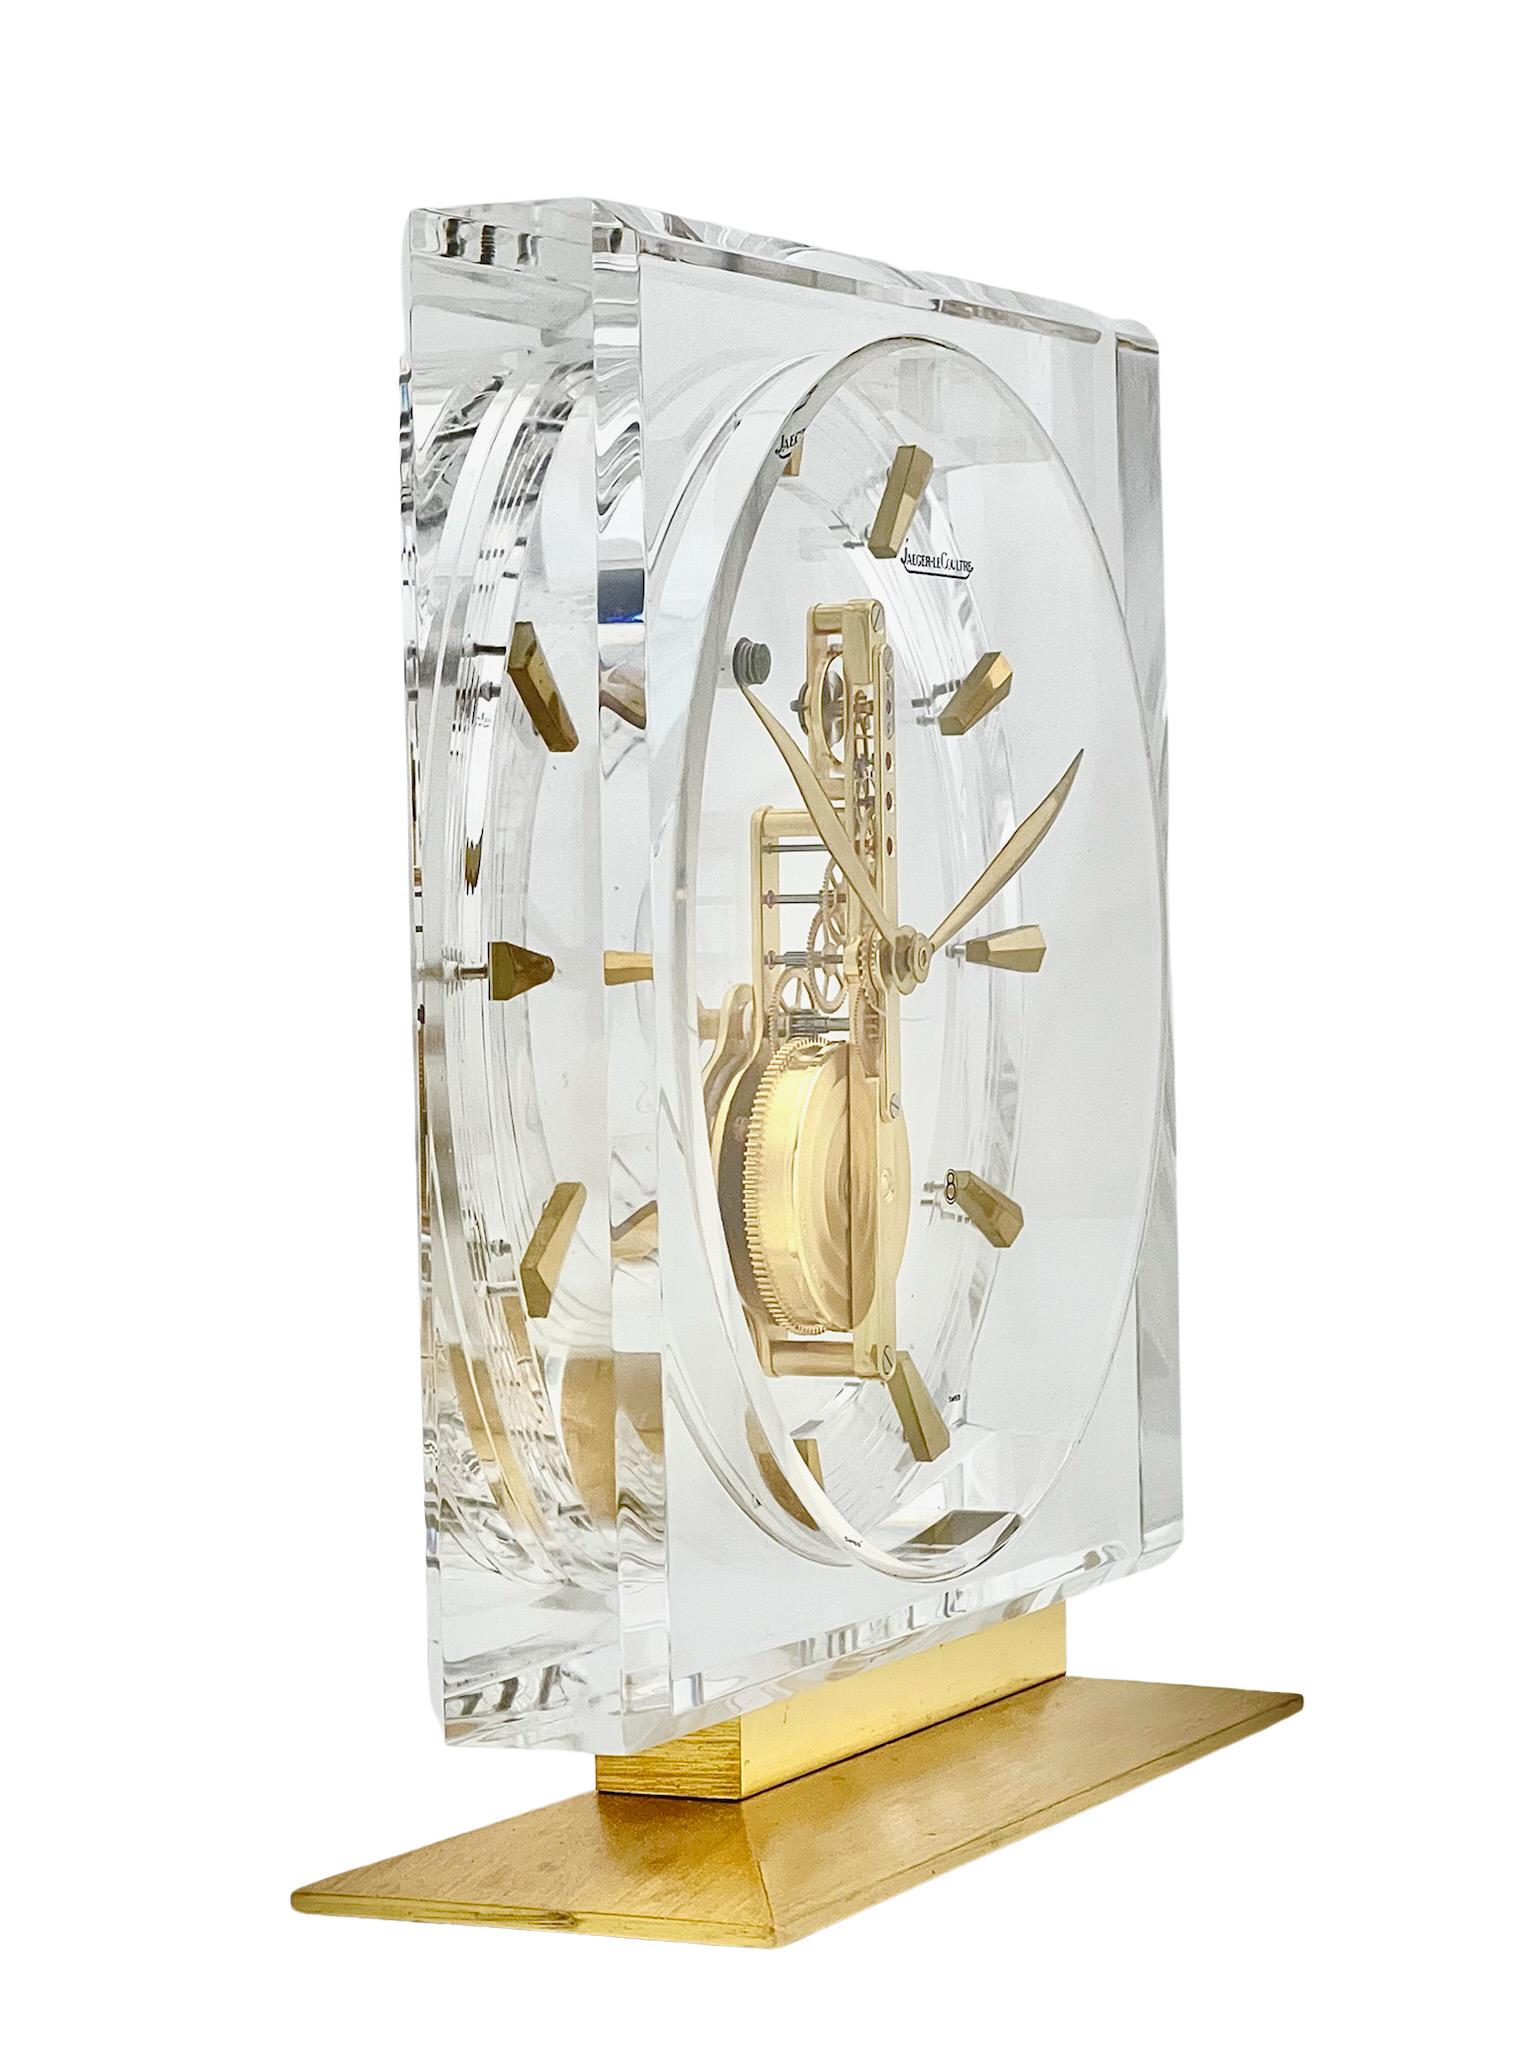 A stunning lucite and brass Jaeger LeCoultre Inline Skeleton Clock, with a clean minimalistic design which would look stylish in any setting. The beauty of these skeleton clocks is that you can see the 16 jewel Swiss movement working and watch the